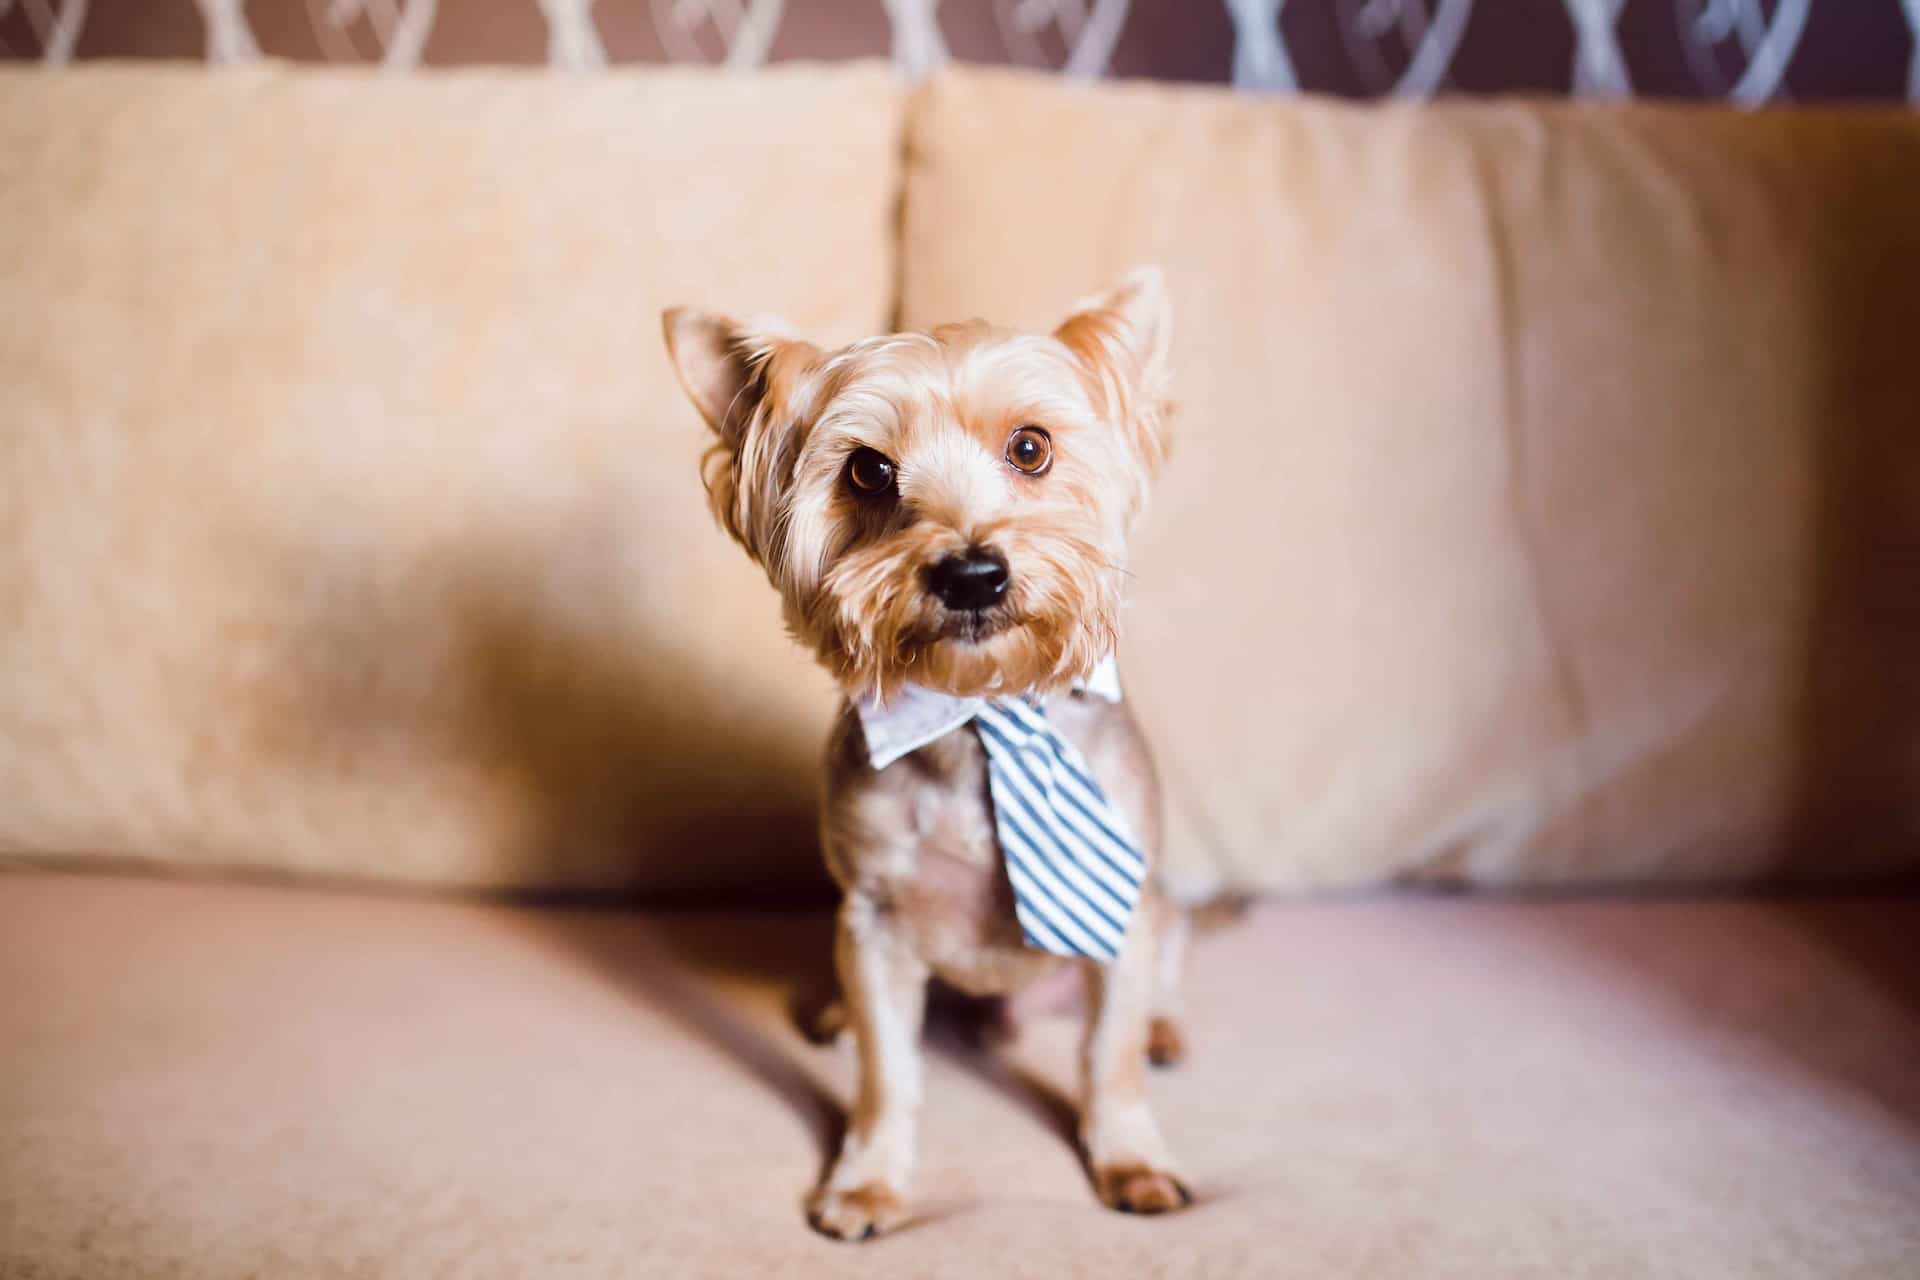 small dog with tie on couch